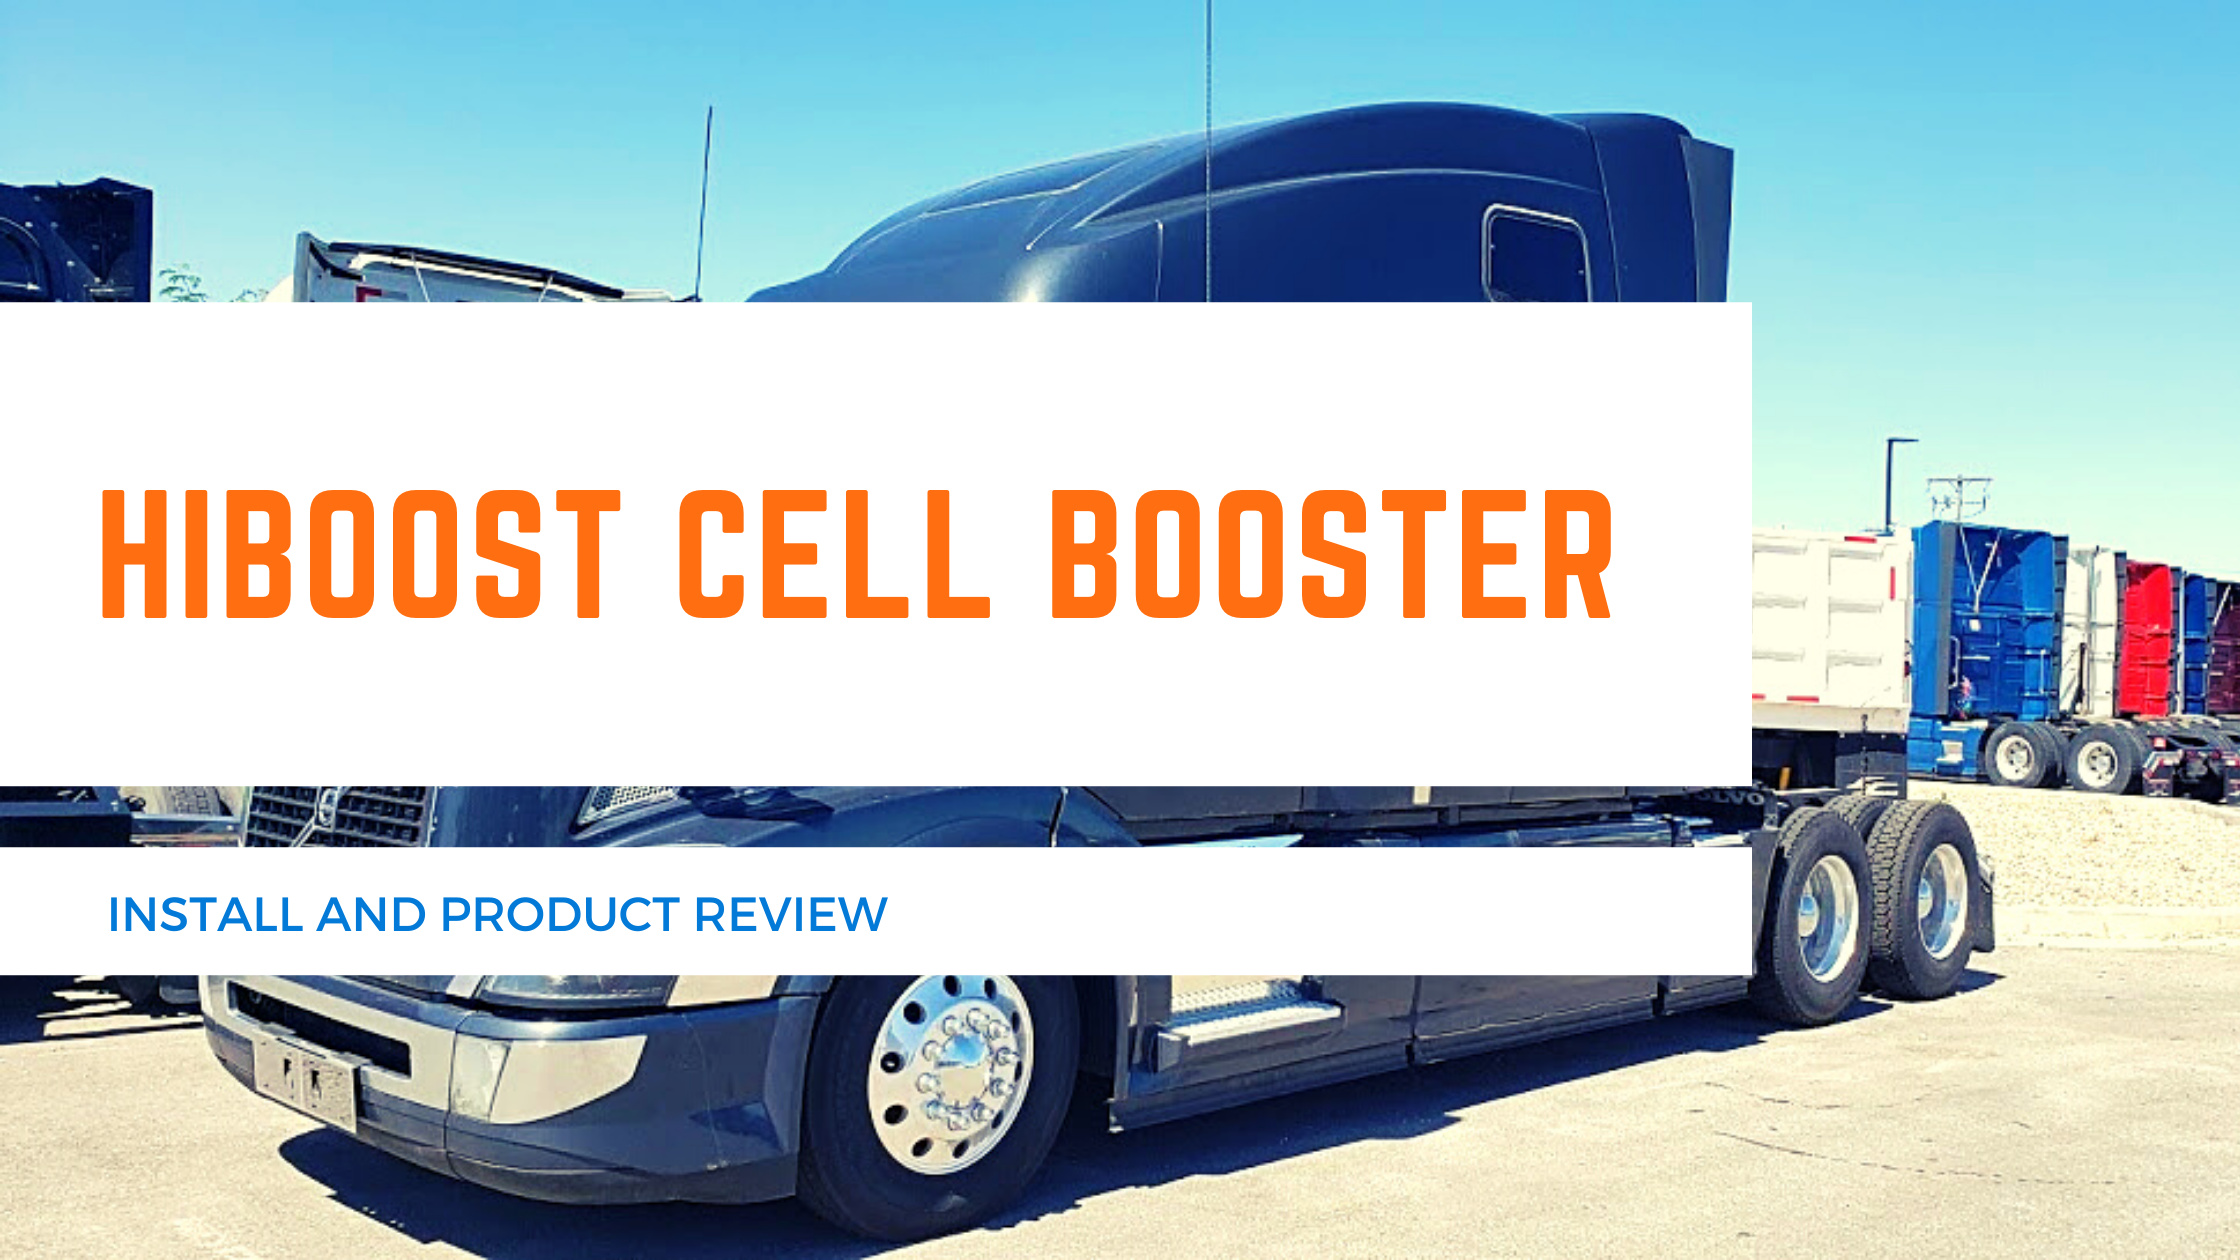 HiBoost Cell Booster Product Review 